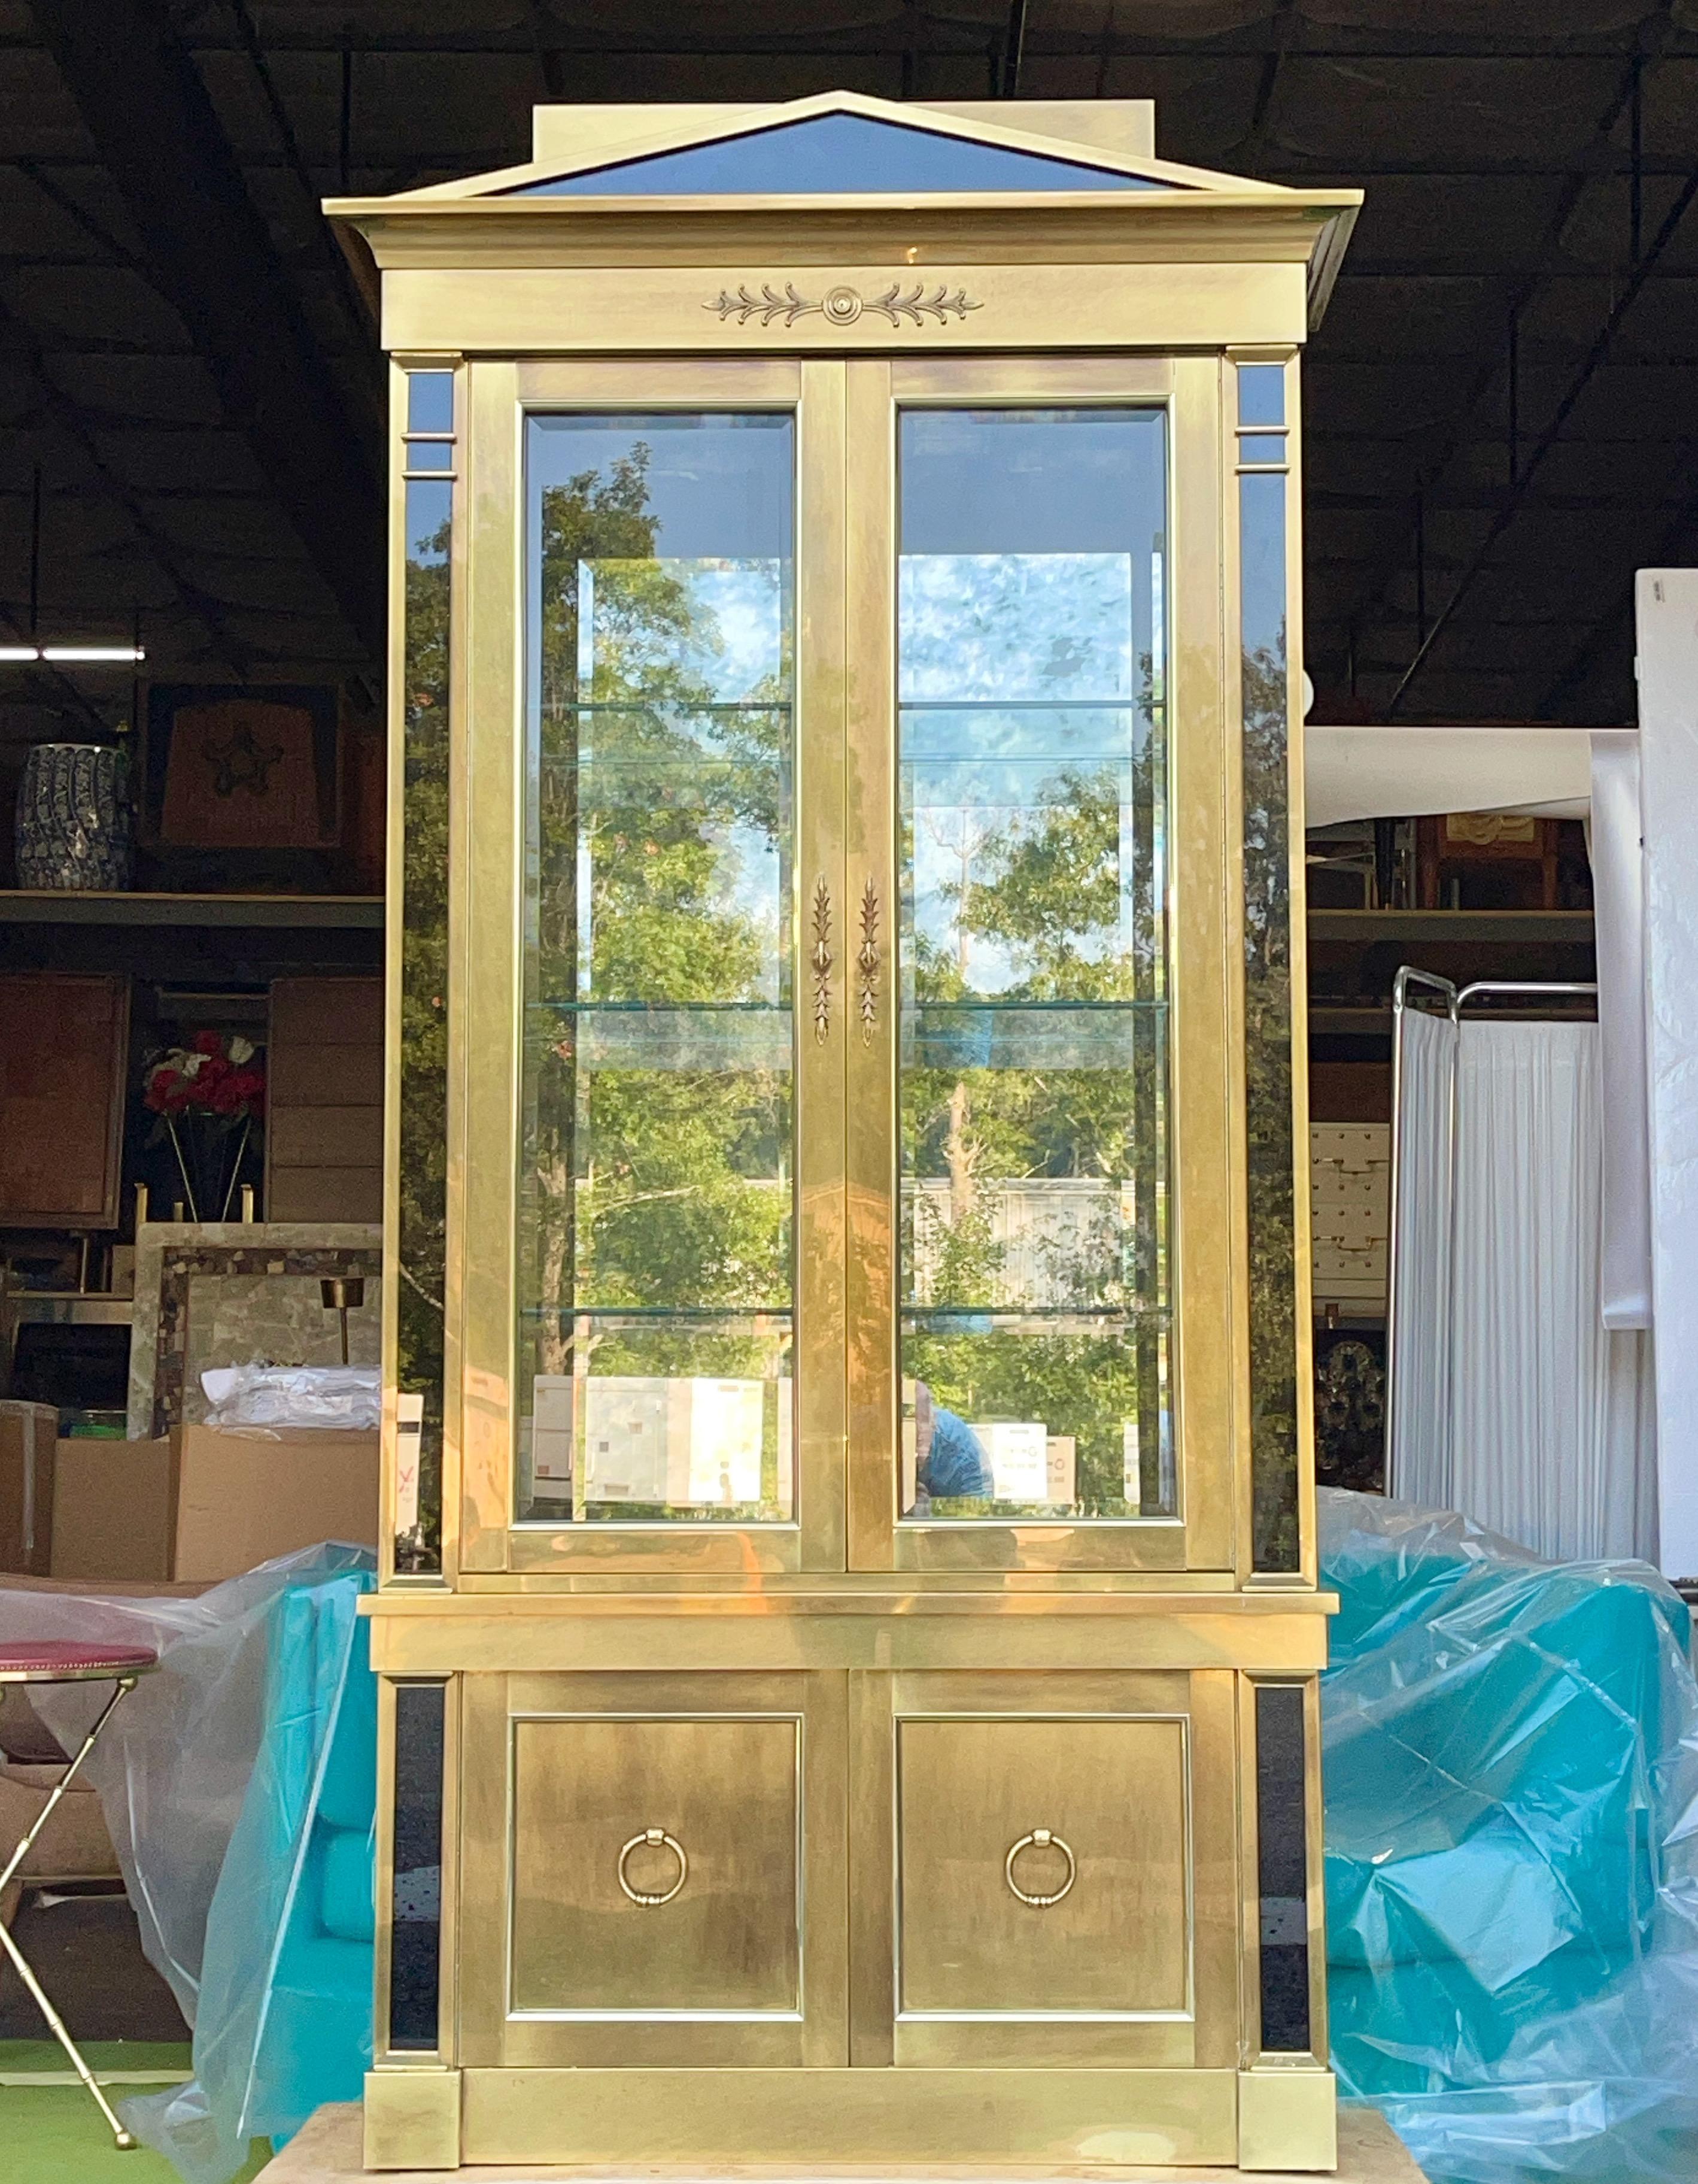 Mastercraft model 260 'China Cabinet' or vitrine, display cabinet, curio in the empire style with pediment.
Hardwood structure clad in patinated solid brass and black mirror trim.
Beveled glass sidelights and windowed doors. Storage cupboard behind